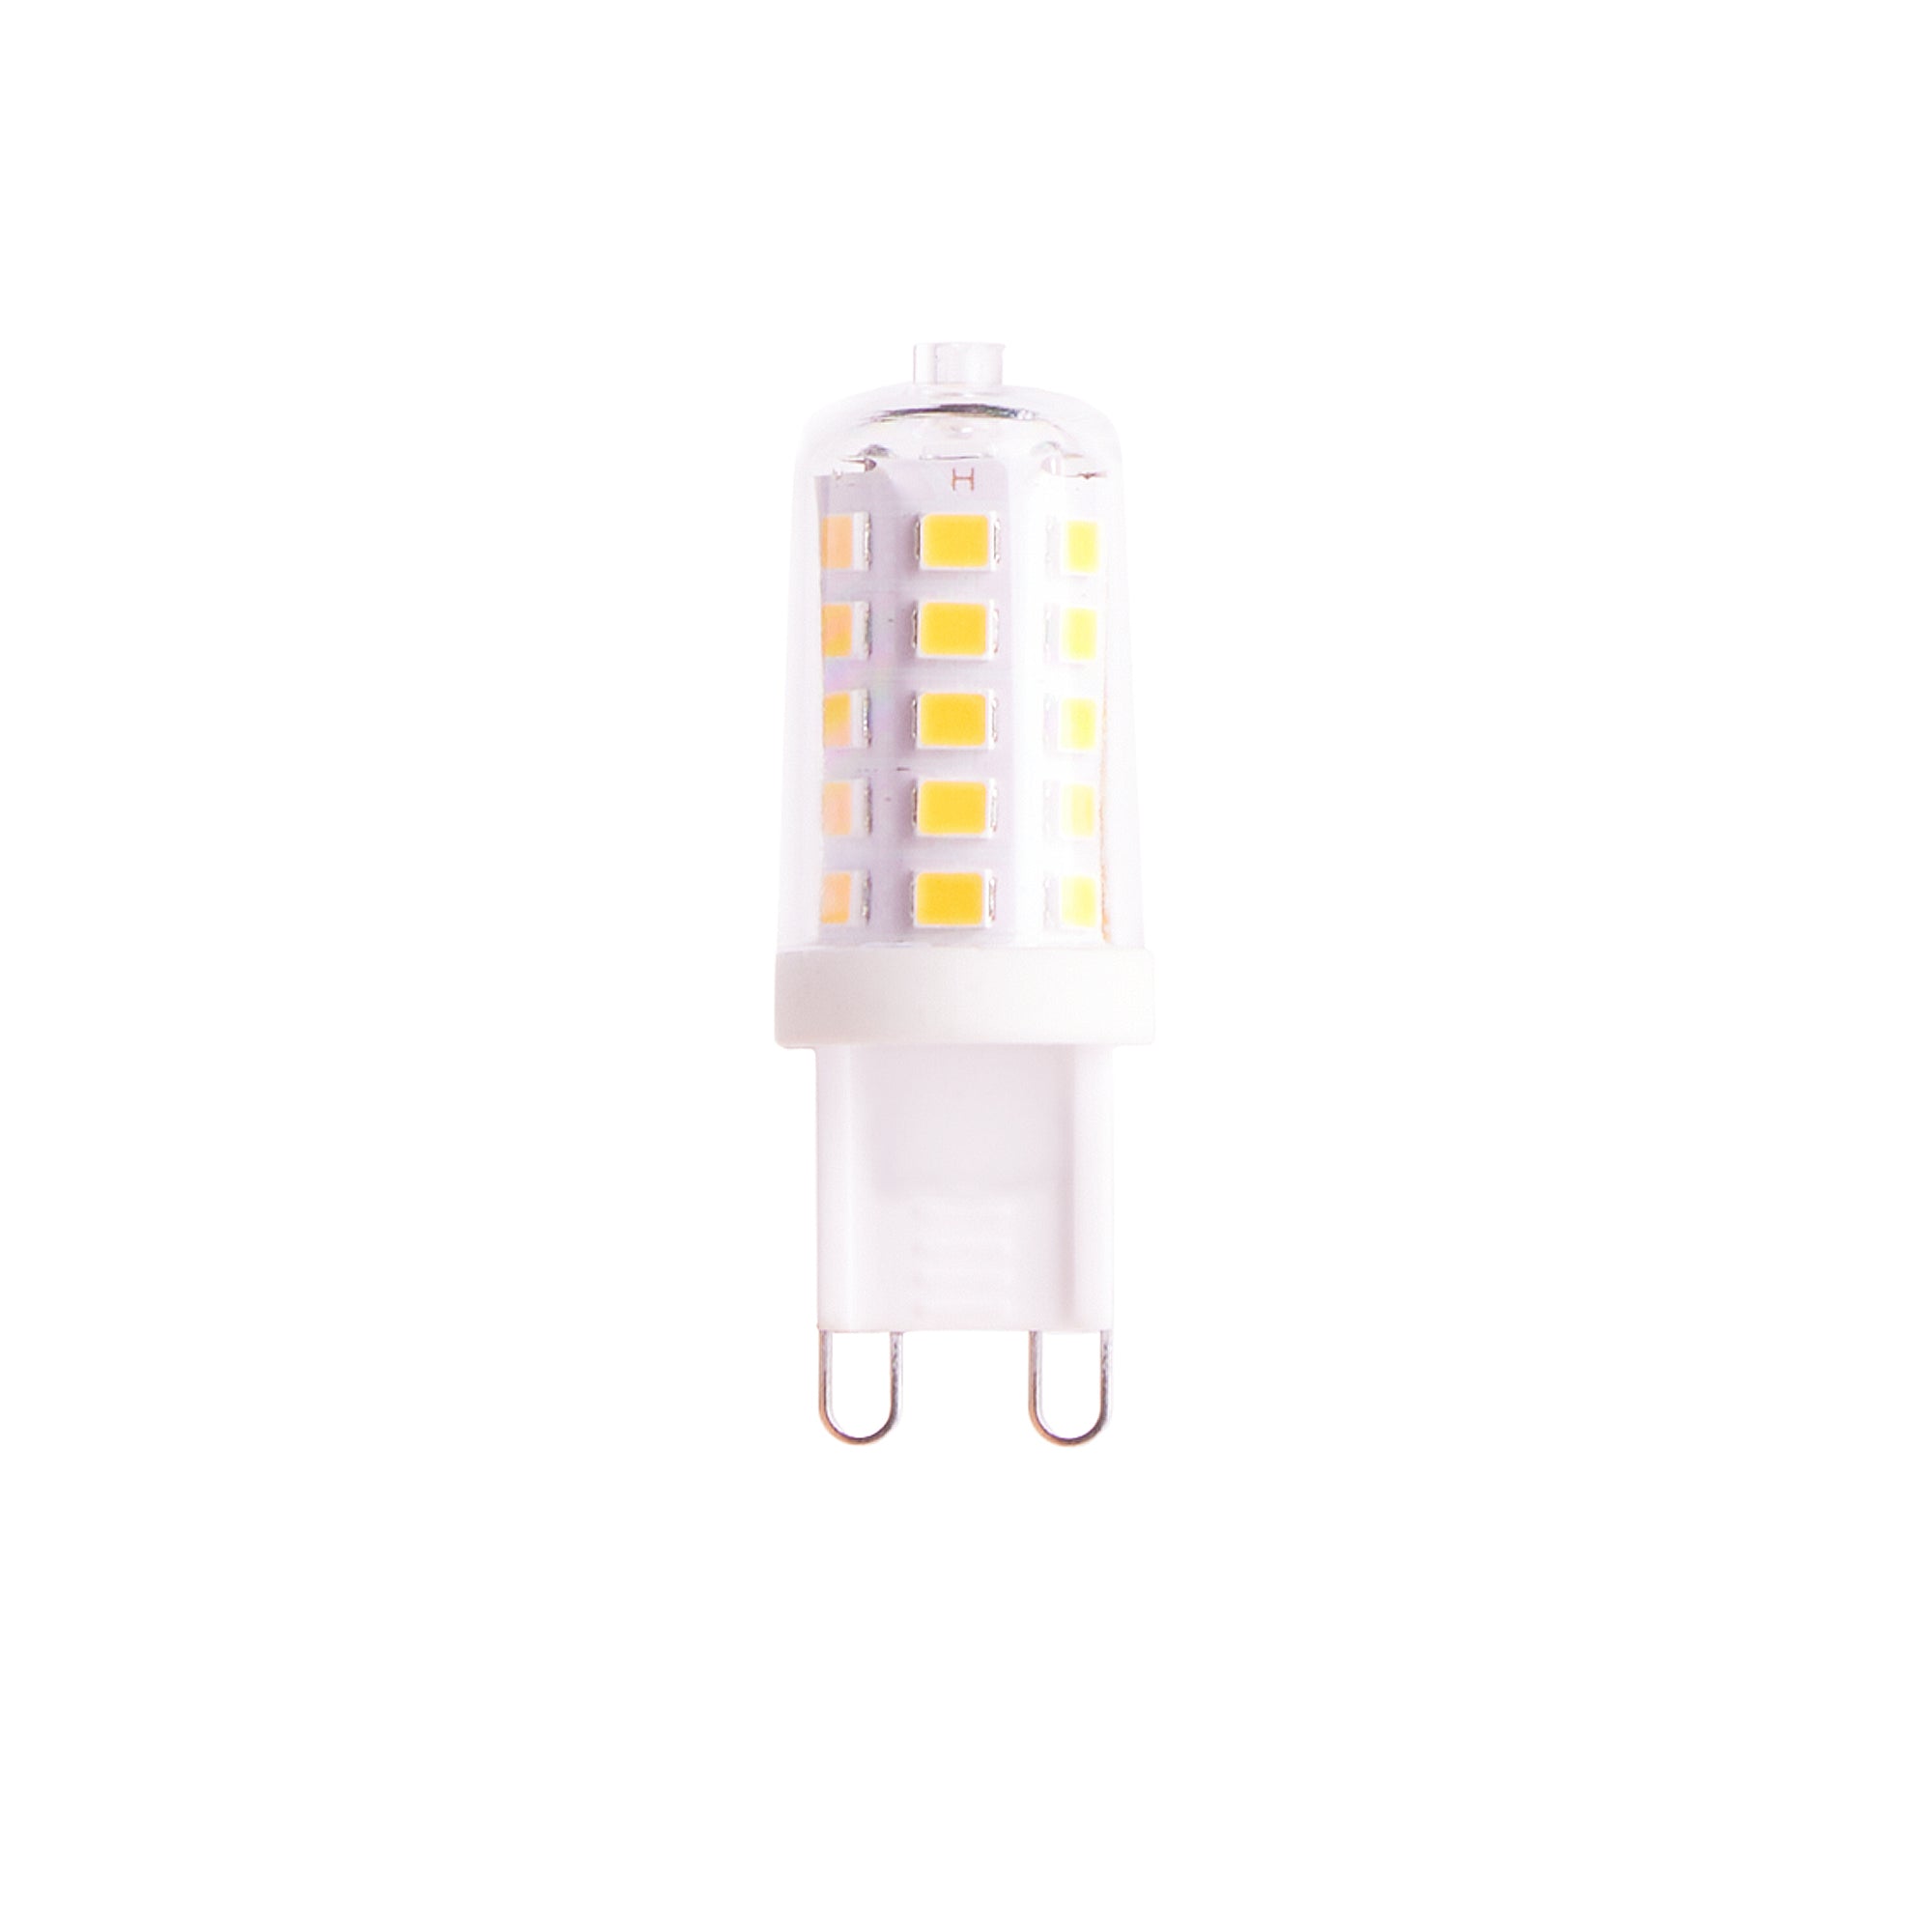 Dimmable 3 capsule bulb